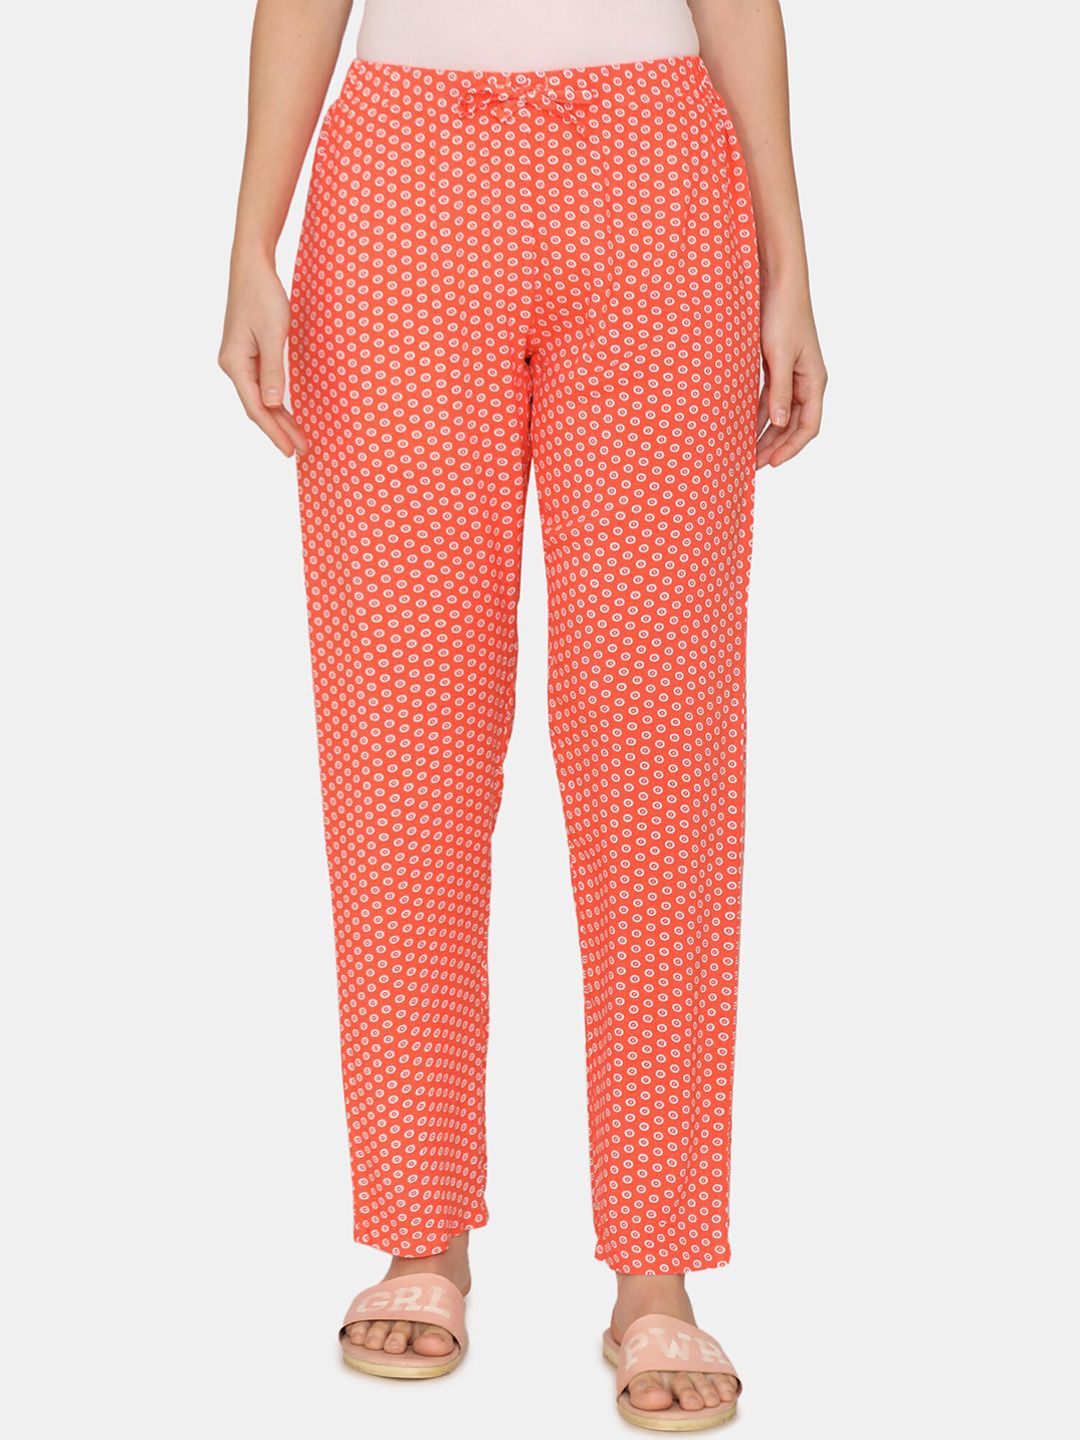 Coucou by Zivame Coral Woven Printed Viscose Rayon Pyjamas Price in India